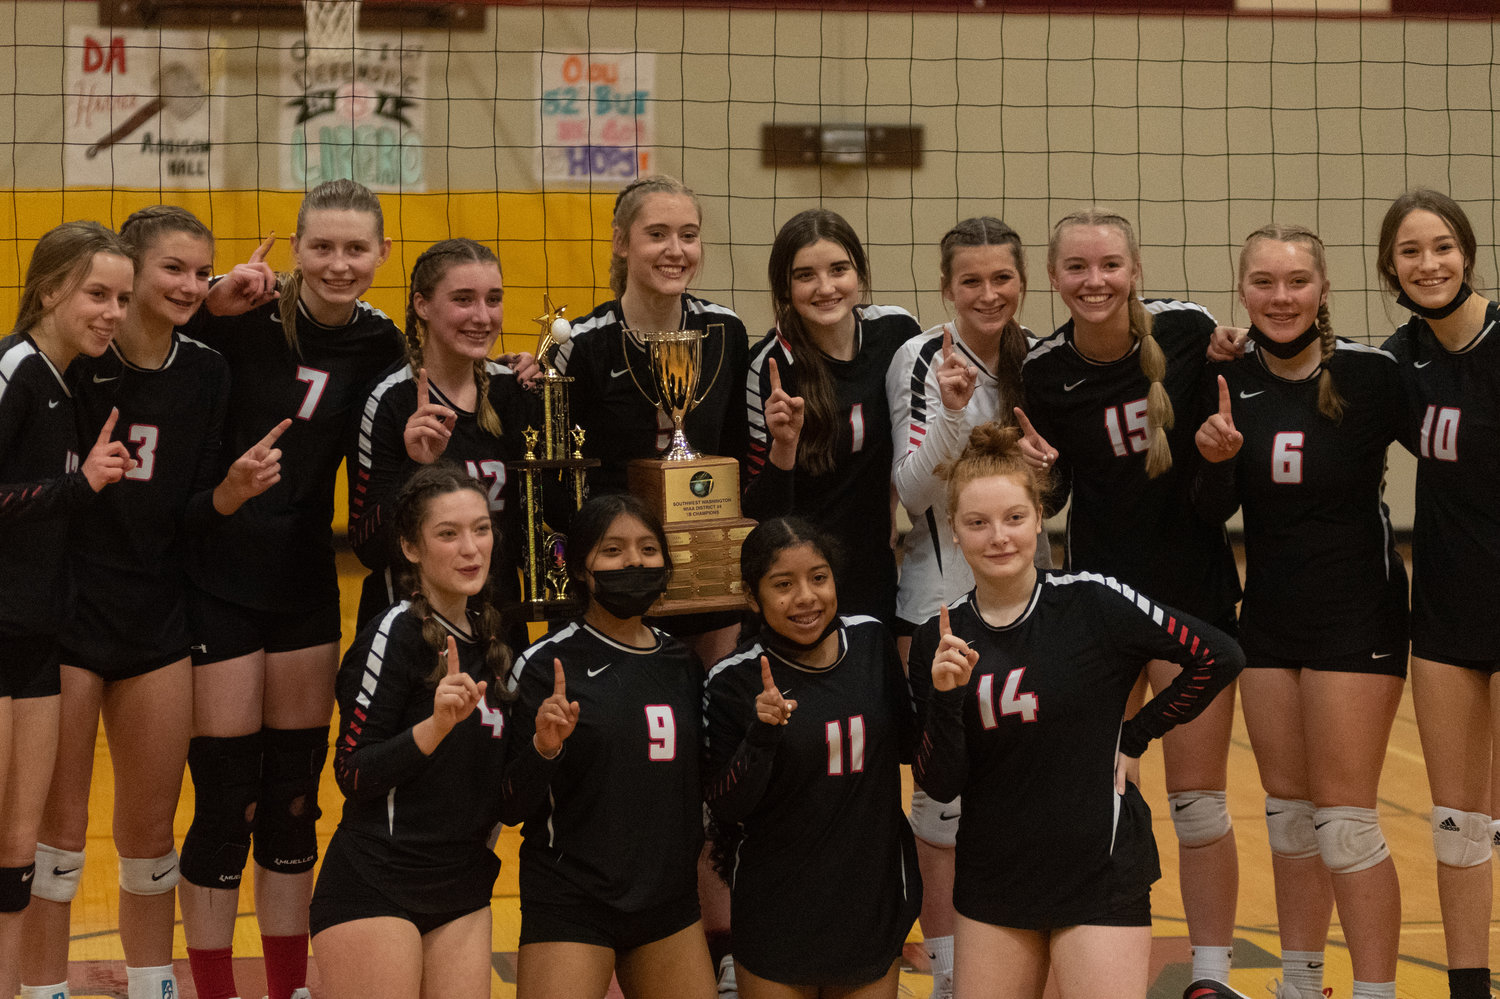 The Mossyrock volleyball team poses for a photo with the 1B District 4 trophy after beating Naselle in Winlock Nov. 6.